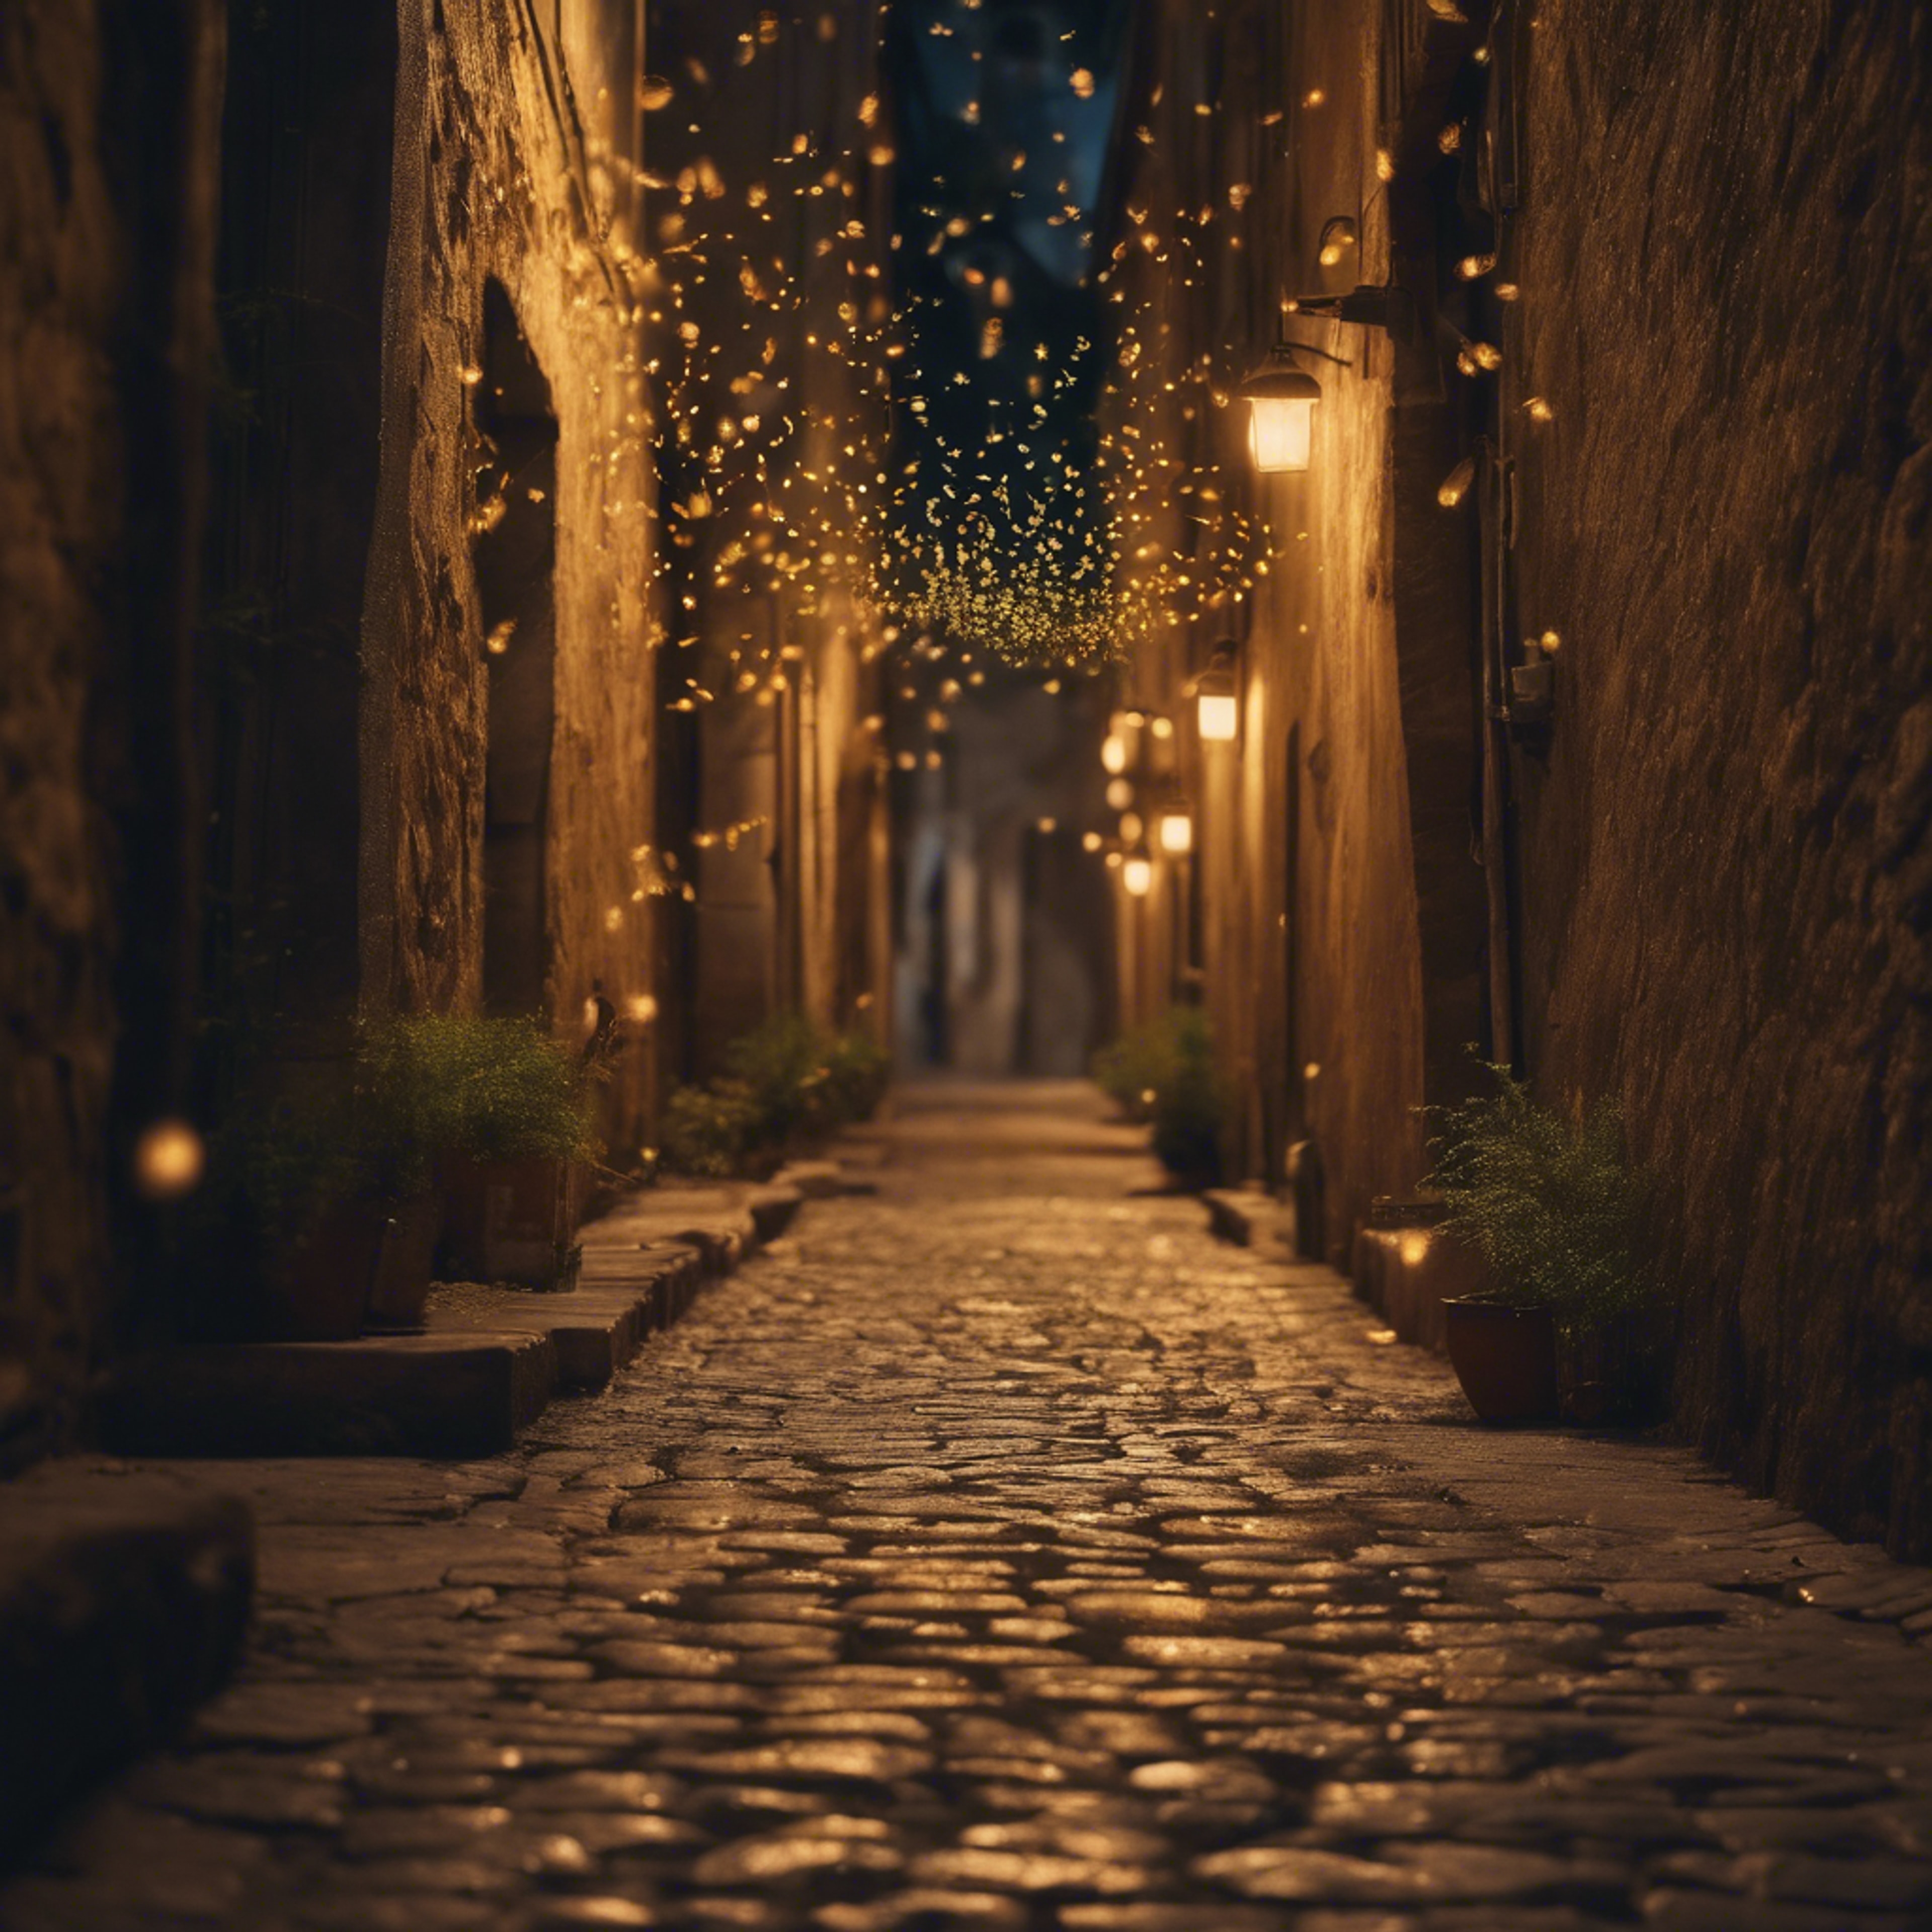 Quiet alleyway in an old city lit by hundreds of flickering fireflies.壁紙[e1ec9e227f82406b8b85]